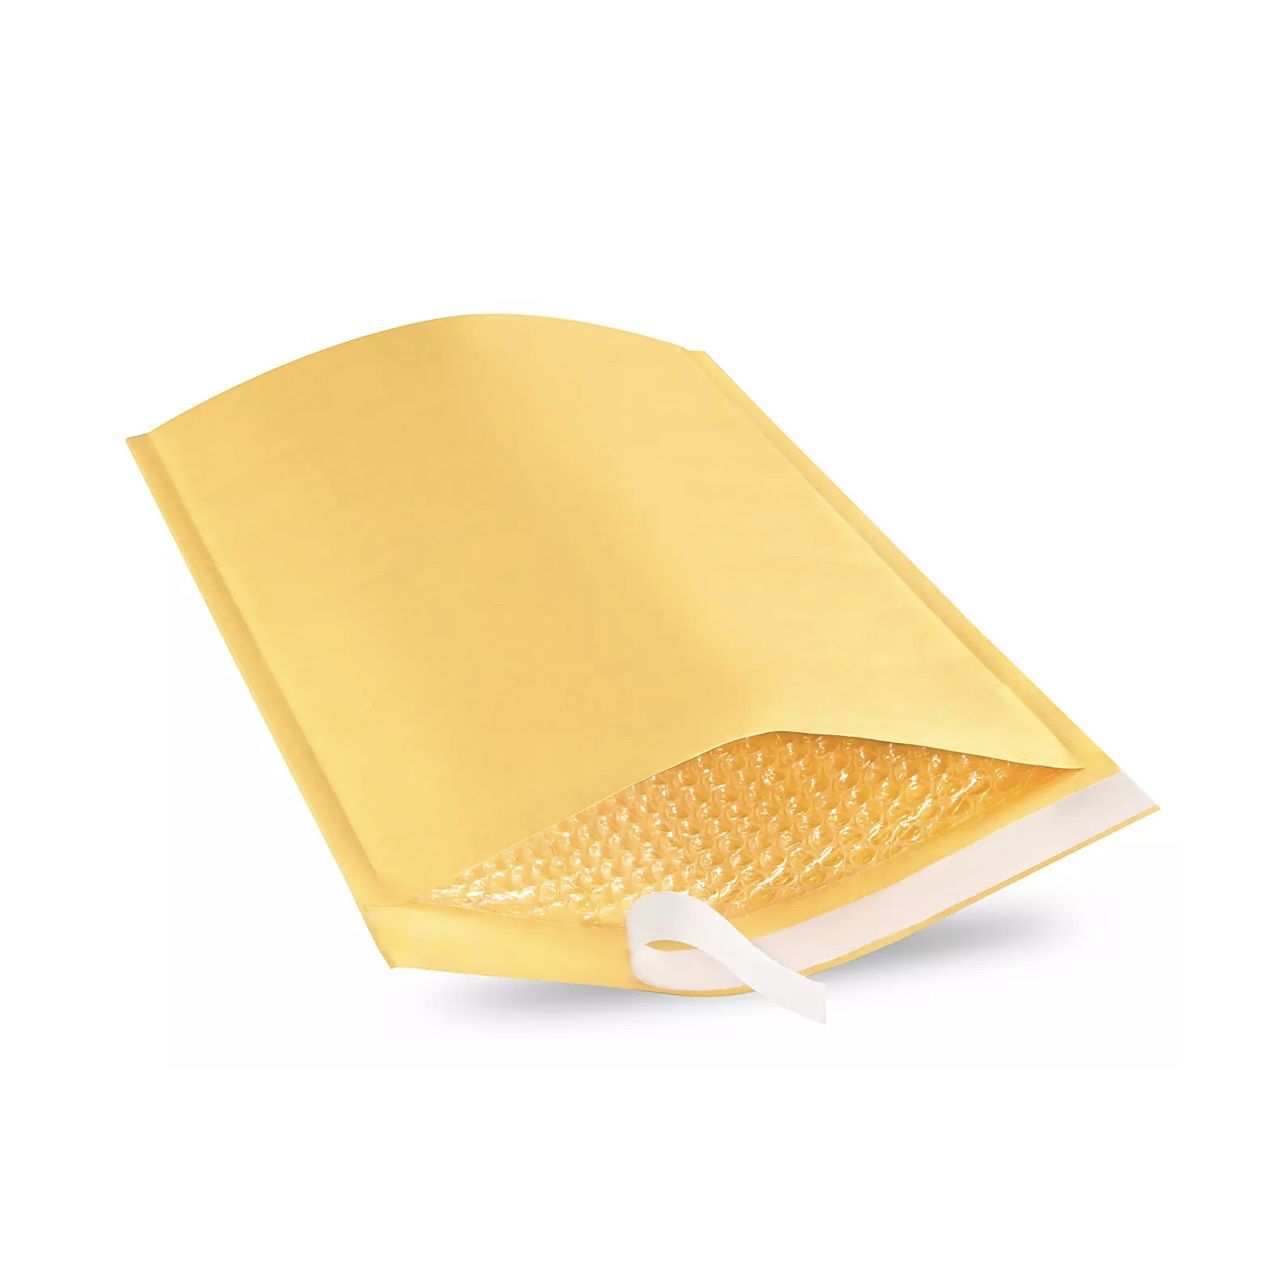 Uline Self-Seal Gold Bubble Mailers #5 - 10 1⁄2 x 16" CASE OF 100